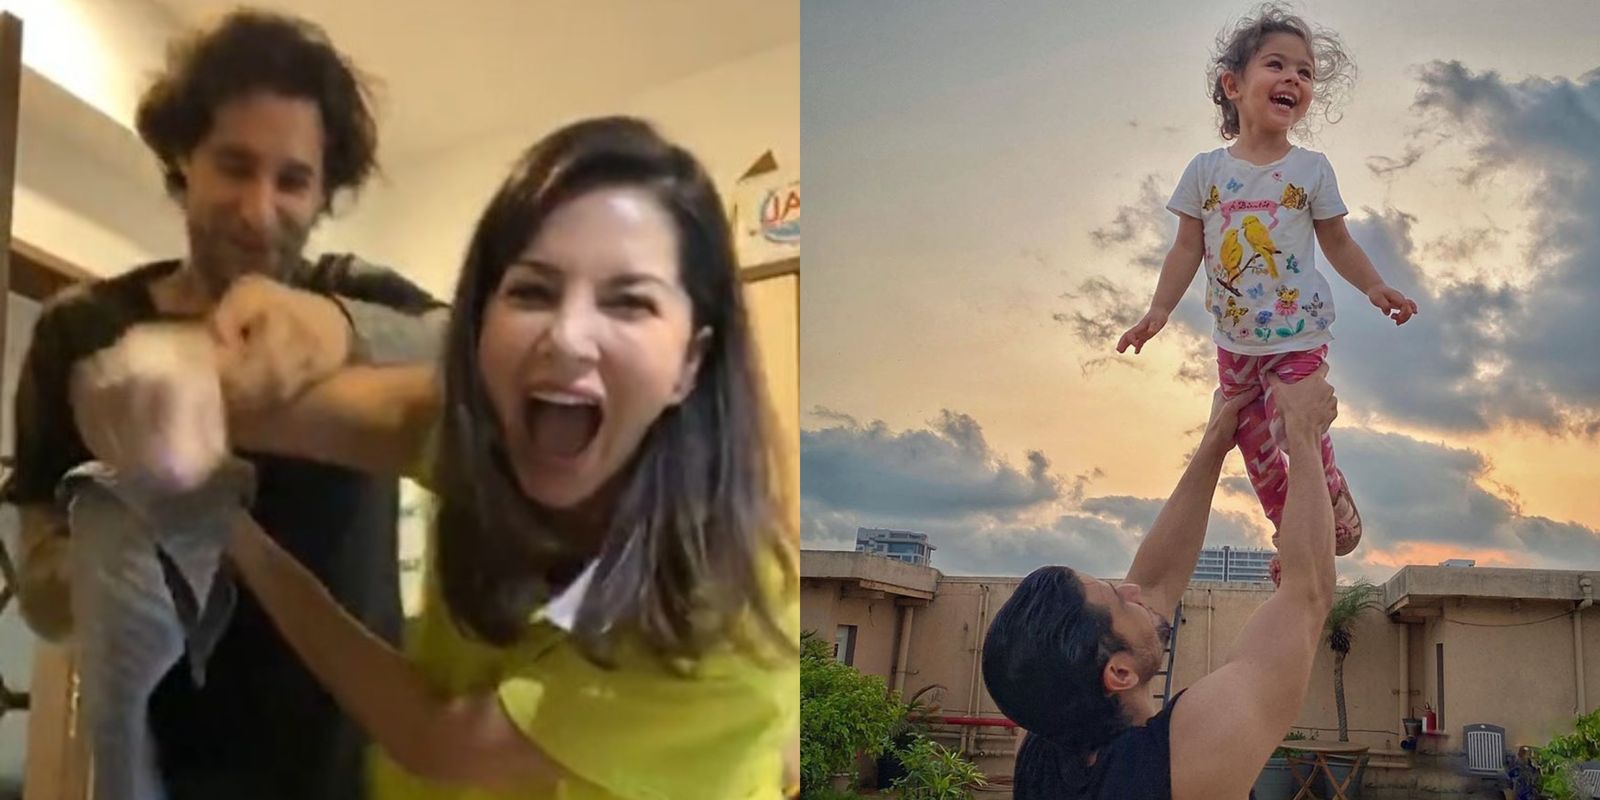 Sunny Leone Pranks Husband Daniel By “Chopping” Her Finger Off; Inaaya Spends Time With Daddy Kunal Kemmu